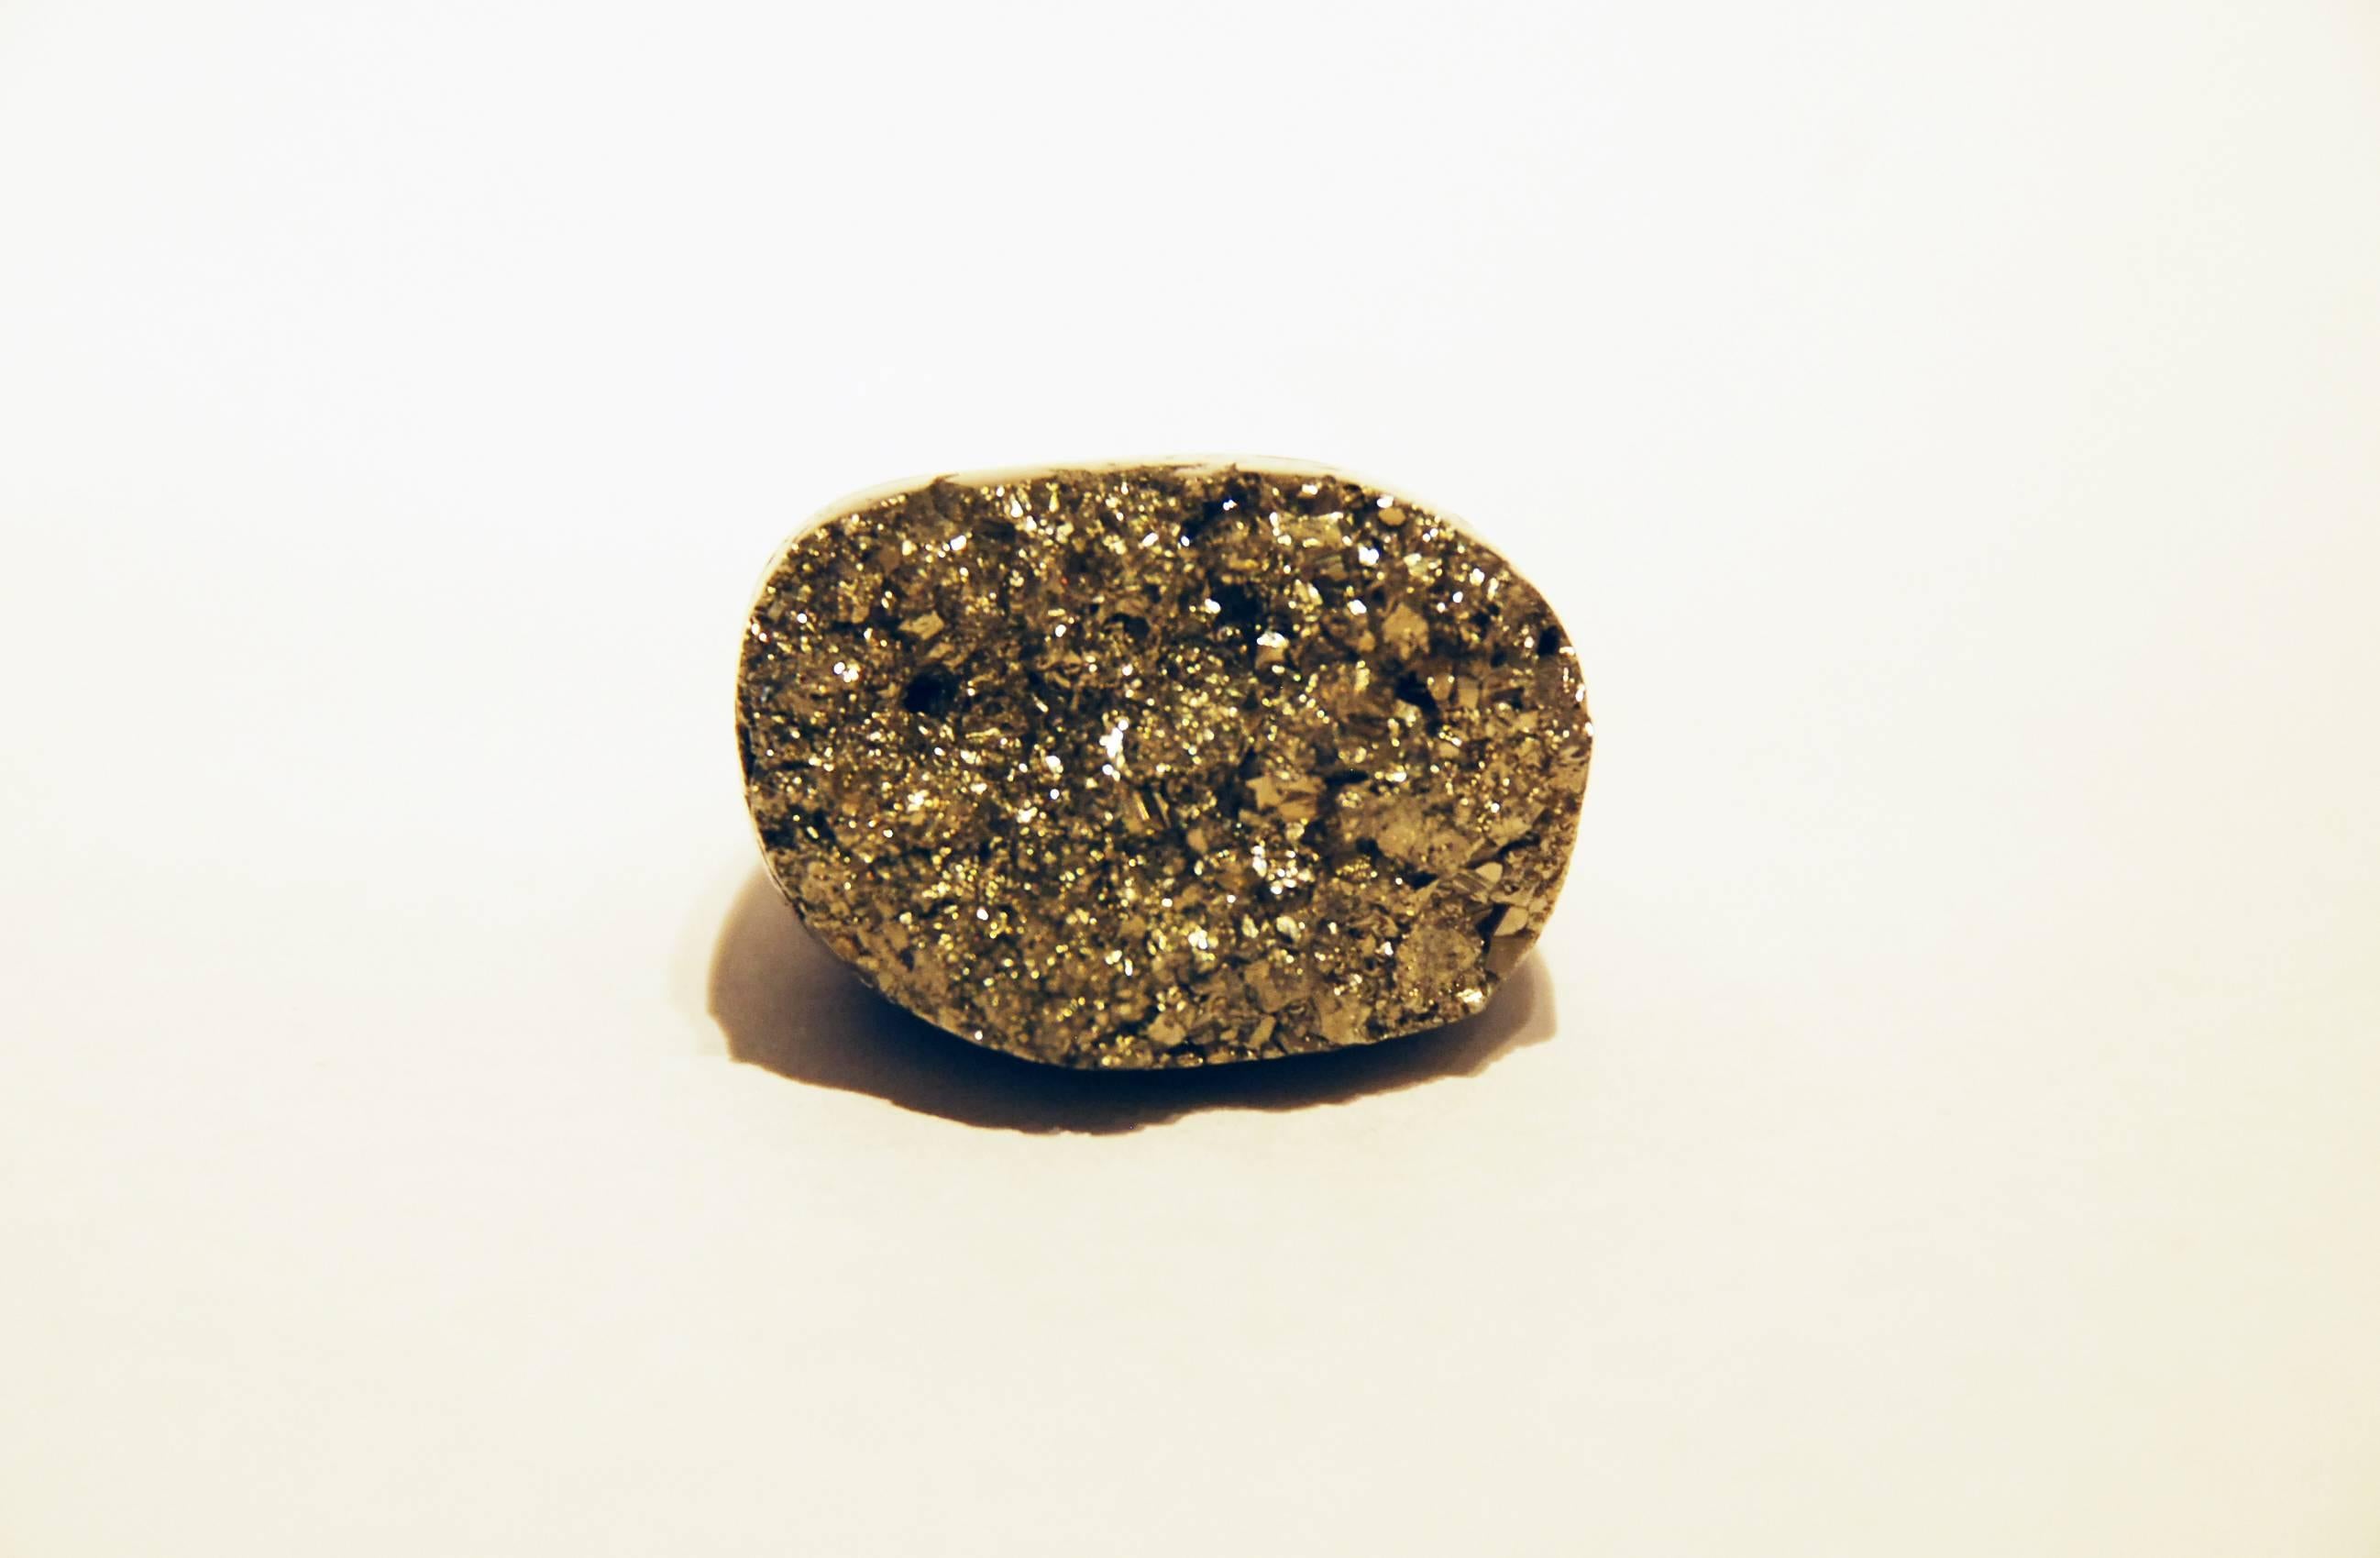 This beautiful pyrite and horn ring (size 8) was designed by Aureliano and Melba Palmeri for Pulowi. It is currently on view at Cristina Grajales Gallery in New York, NY. 

Since the founding of Pulowi in 2002, Aureliano and Melba Palmeri have